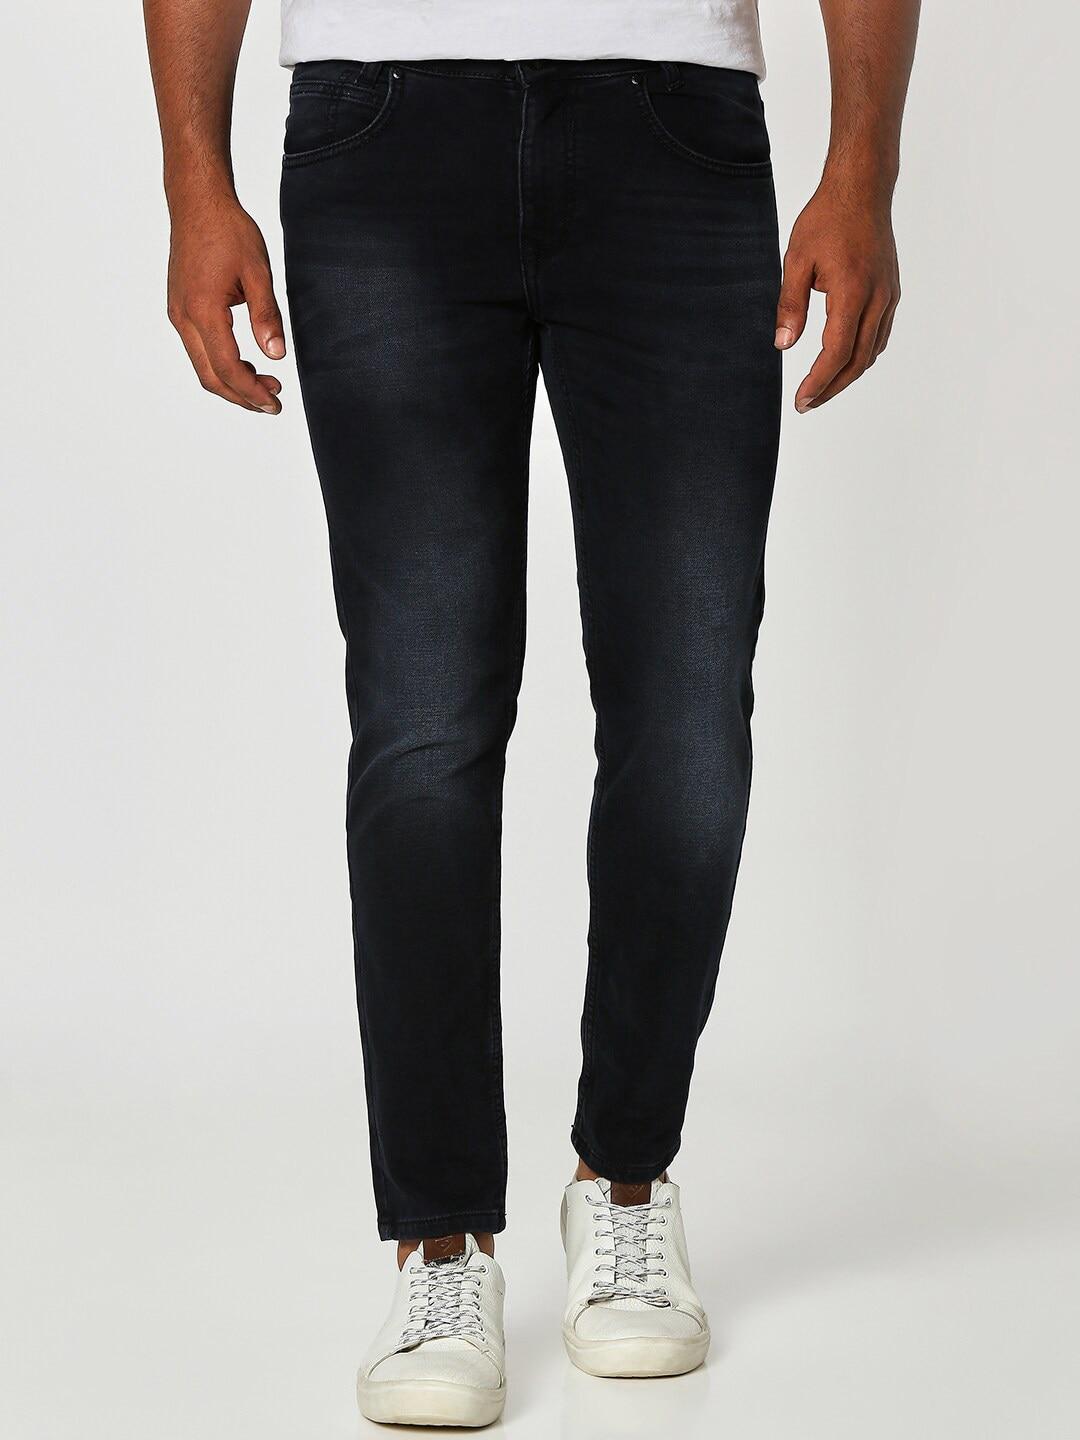 mufti-men-light-fade-stretchable-jeans